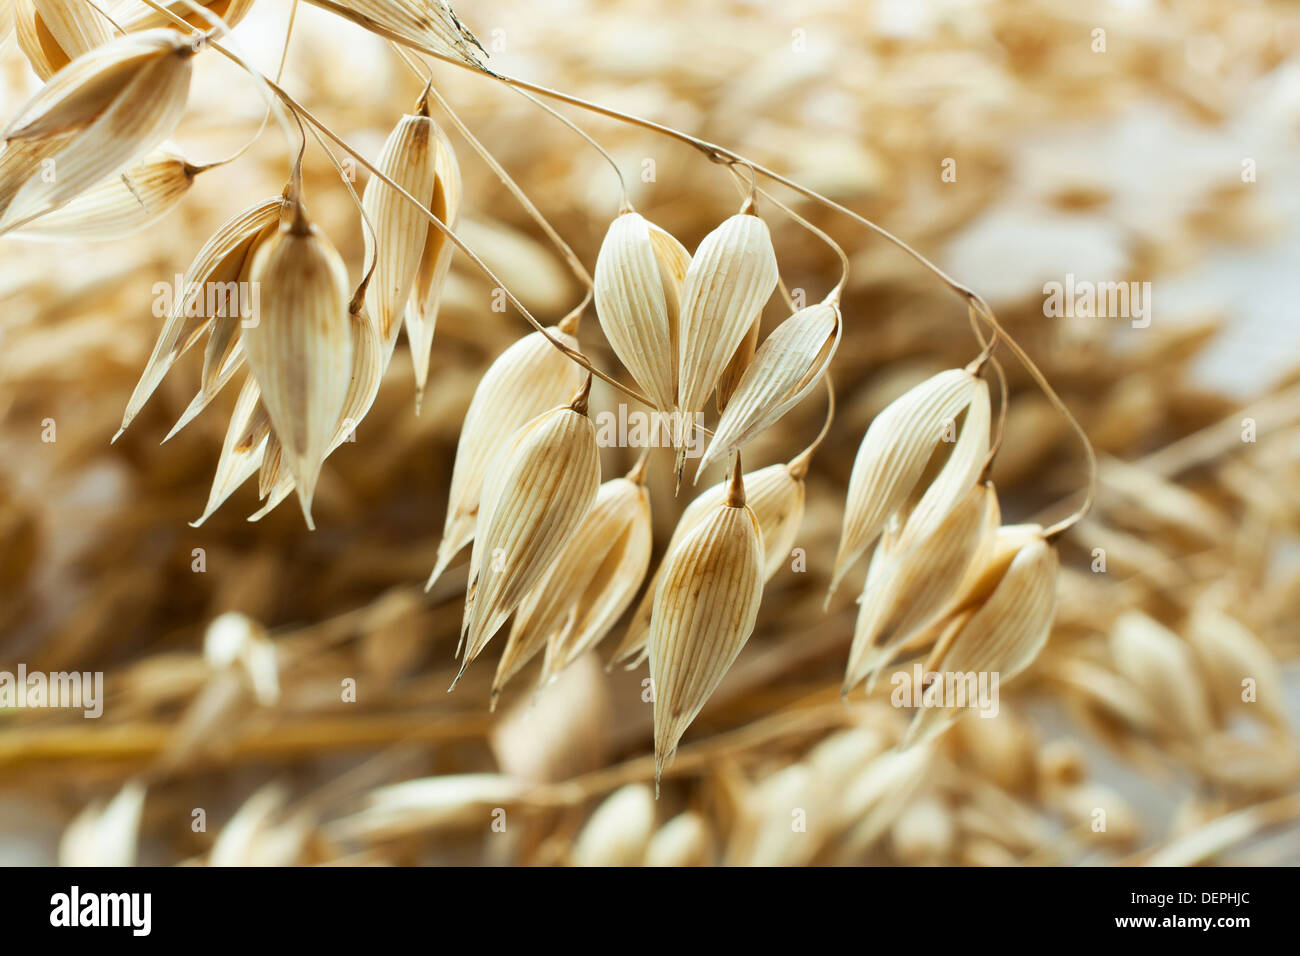 Spike of oats, agricultural background Stock Photo